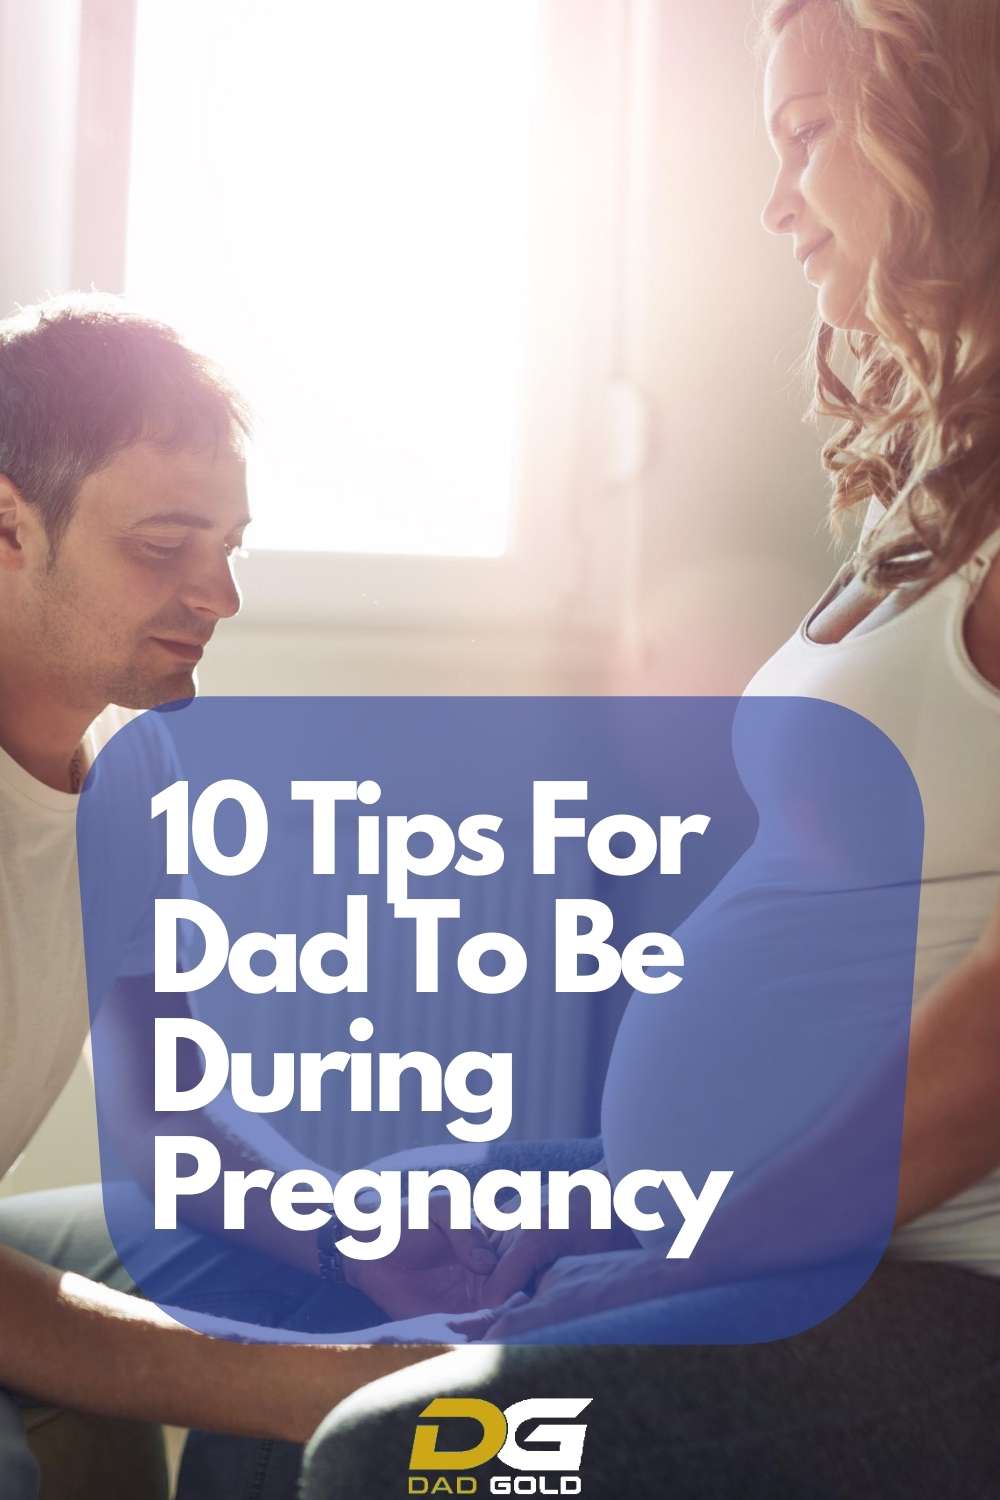 10 Tips For Dad To Be During Pregnancy